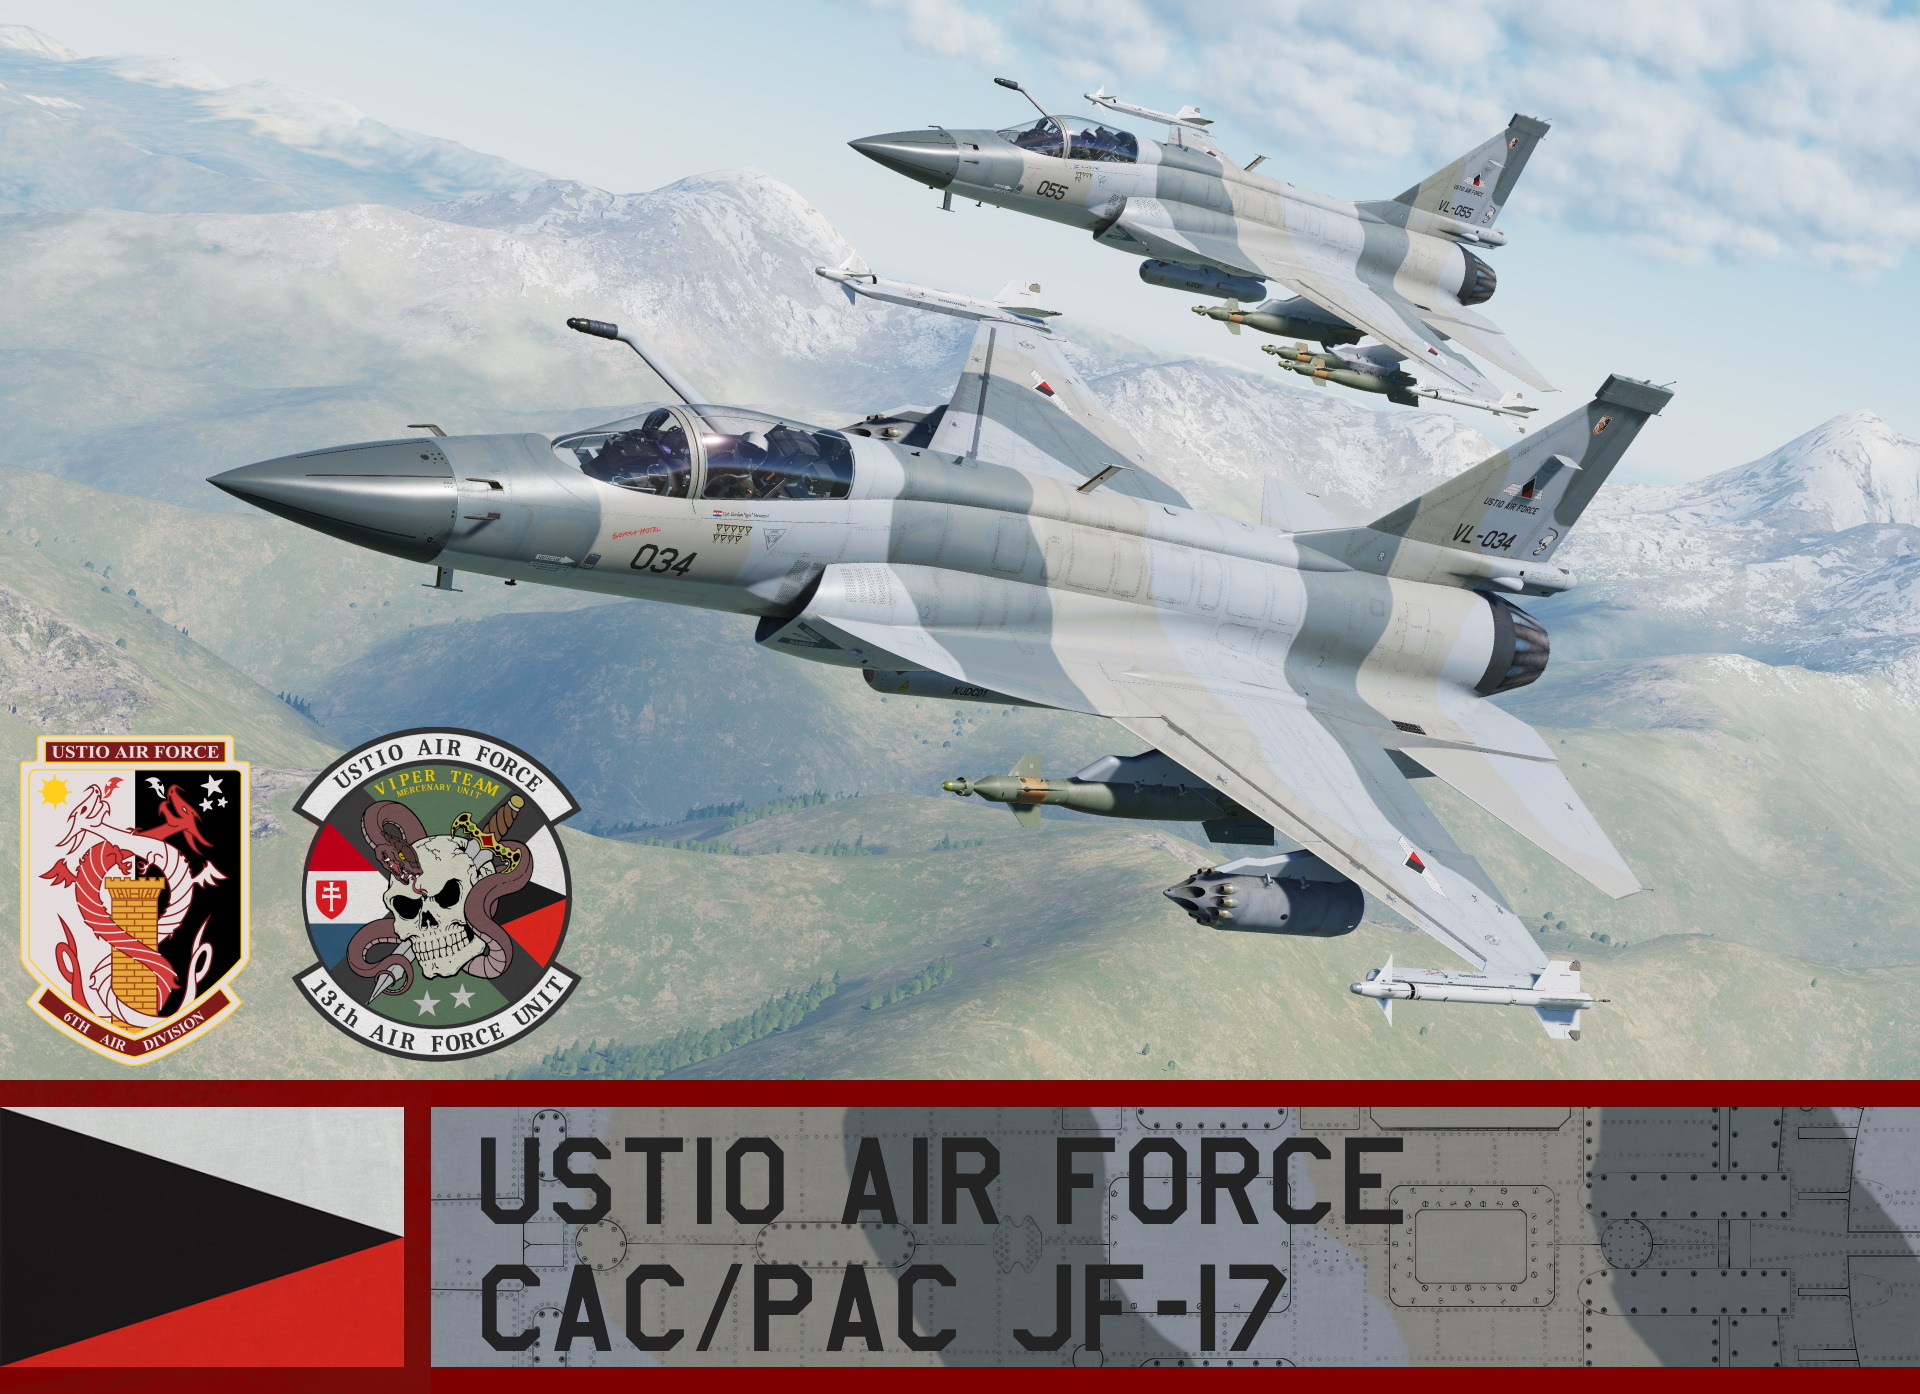 Ustio Air Force JF-17 - Ace Combat Zero (13th AFU)